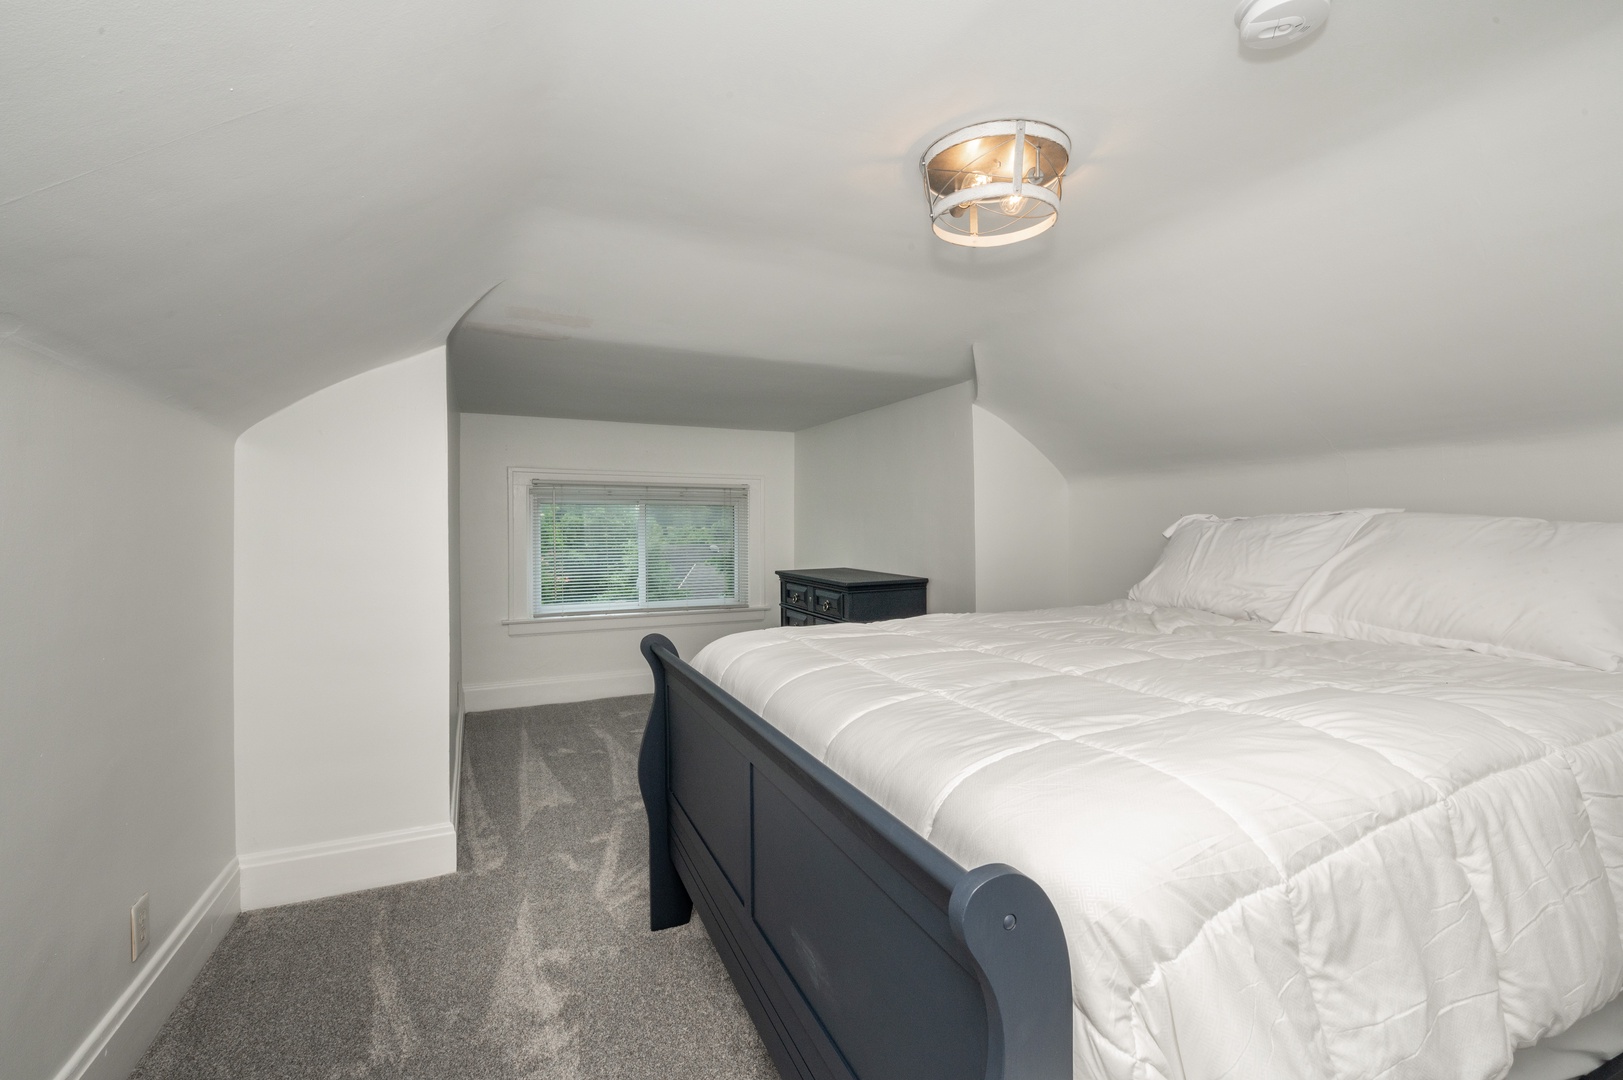 Unit 2 – The final spacious bedroom includes a queen bed & dresser